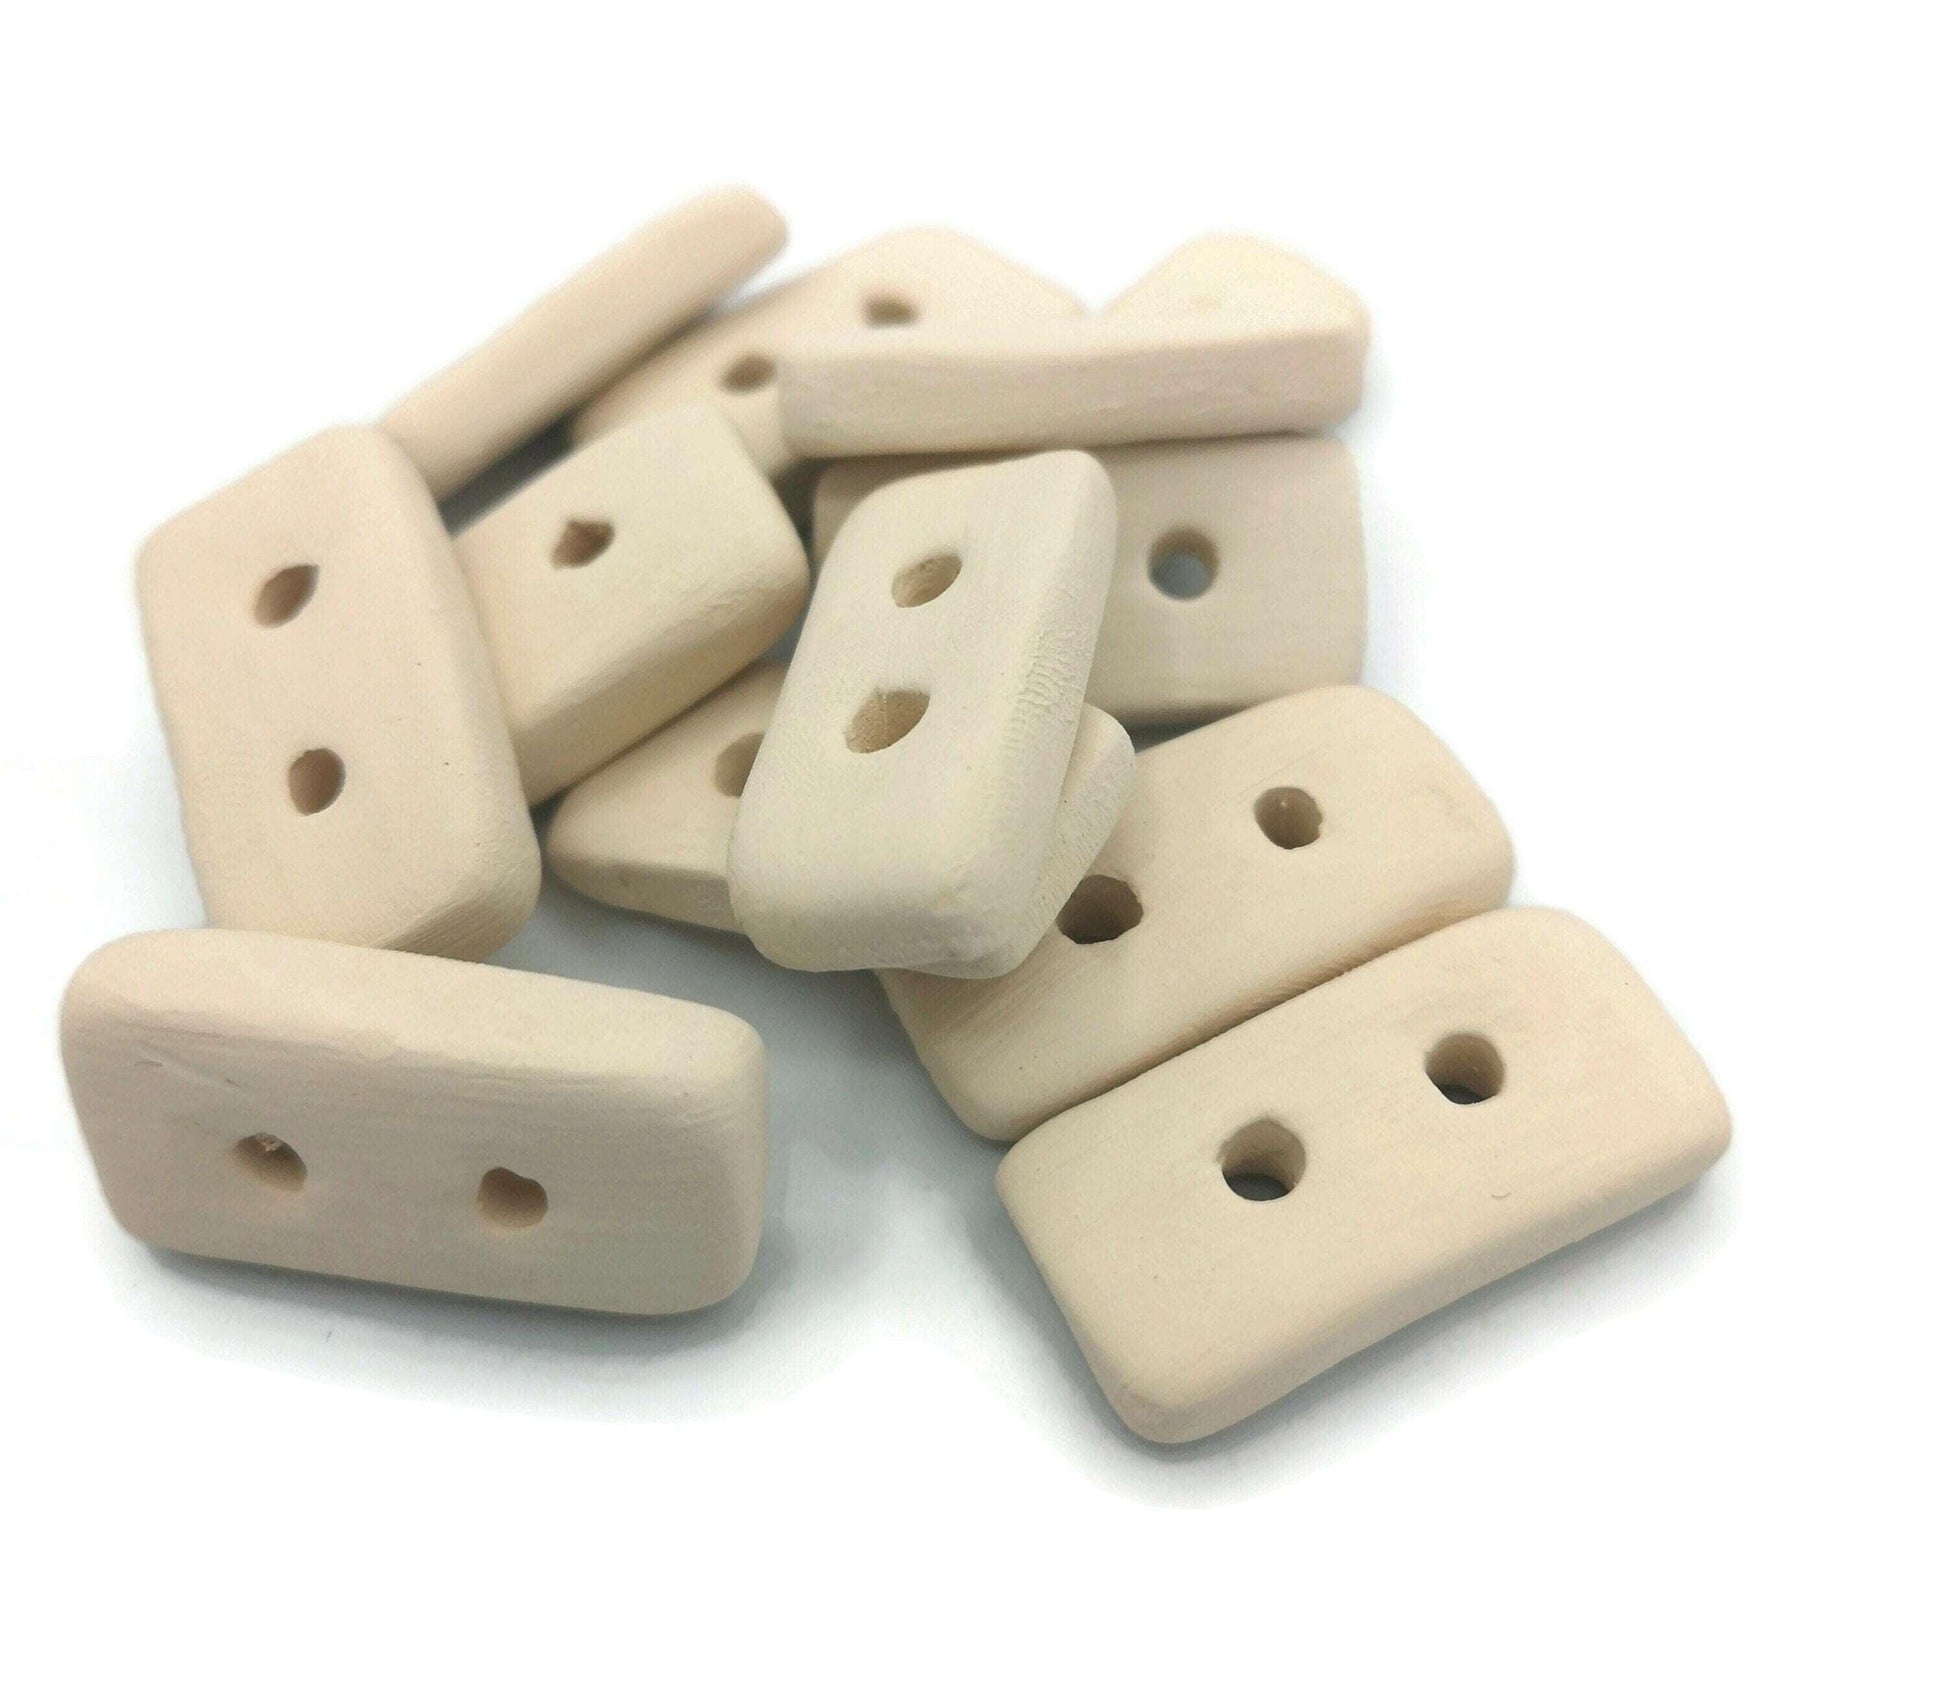 12Pc Handmade Ceramic Bisque Button lot Ready To Paint, Flatback Sewing Buttons For Coat, Unpainted Ceramics To Paint, Diy Craft Kit